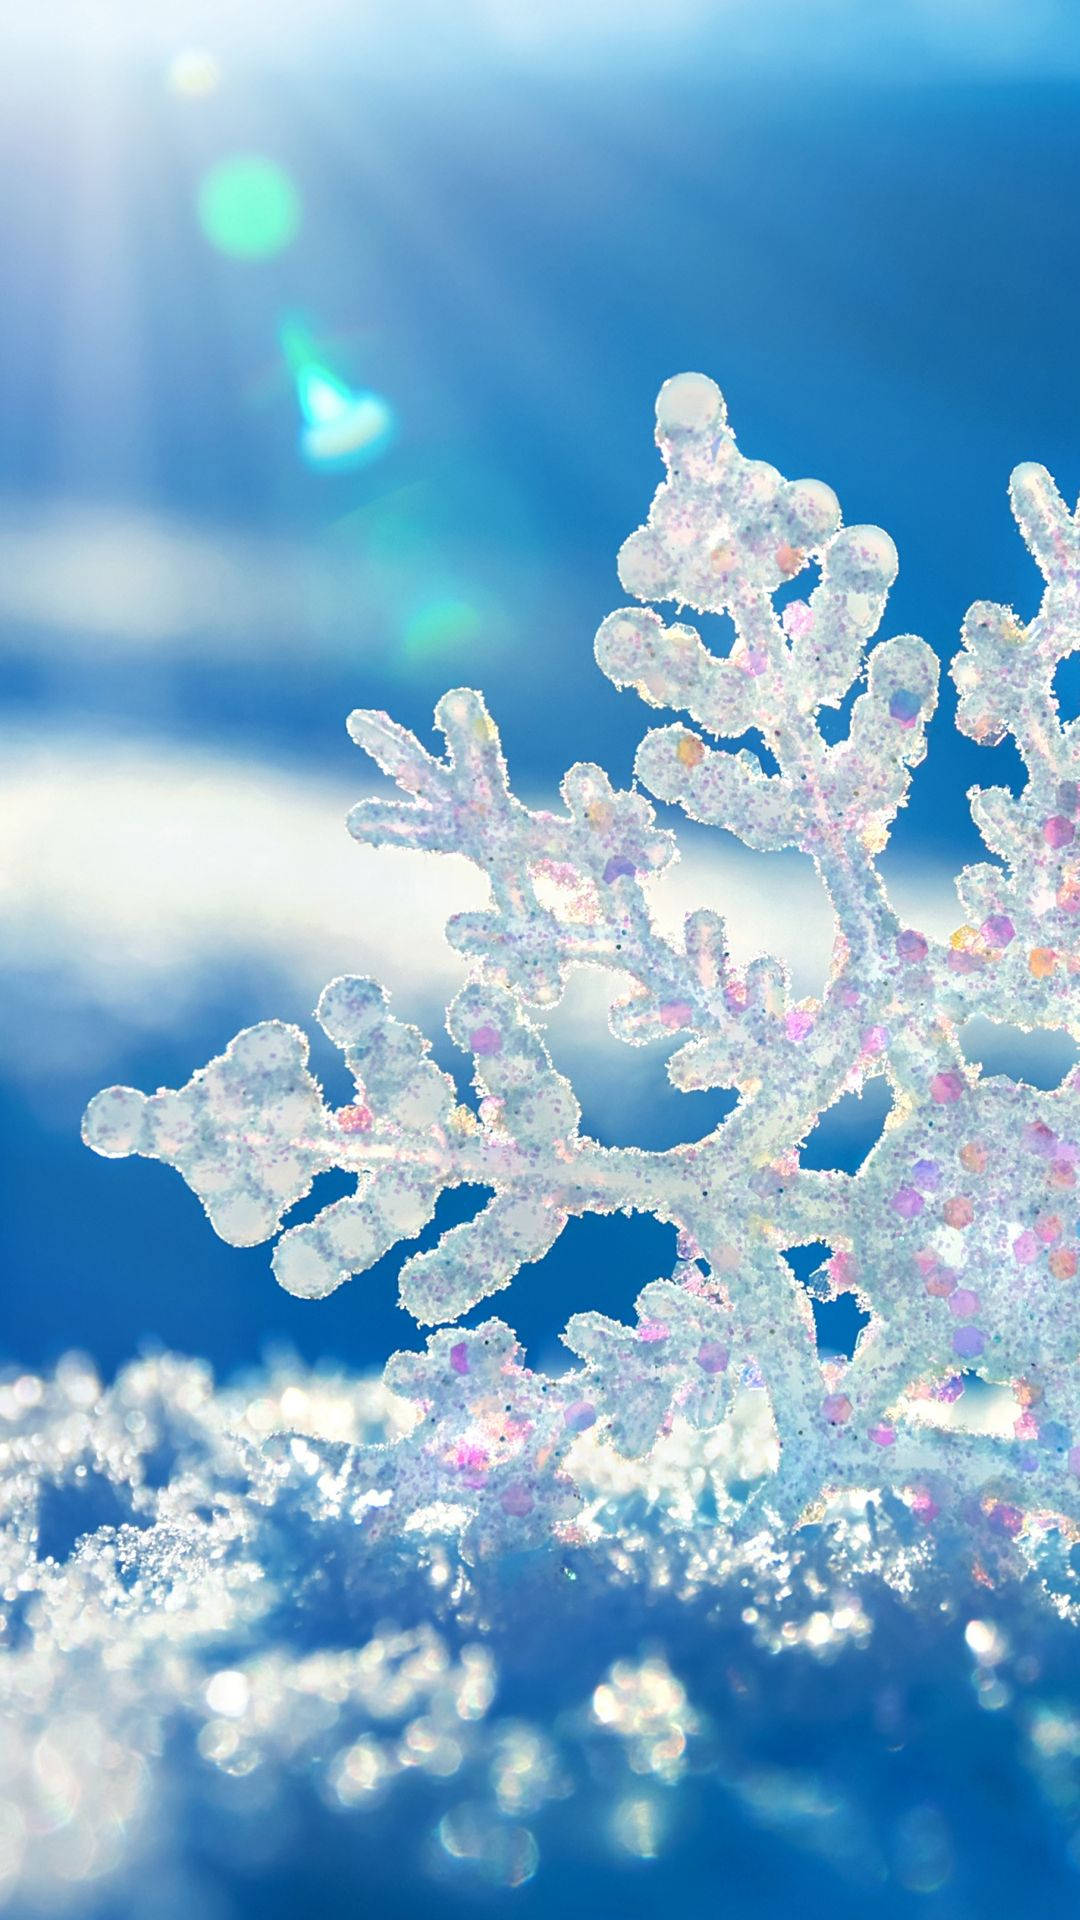 Get this beautiful snowflake Iphone wallpaper to bring a feeling of winter to your device! Wallpaper